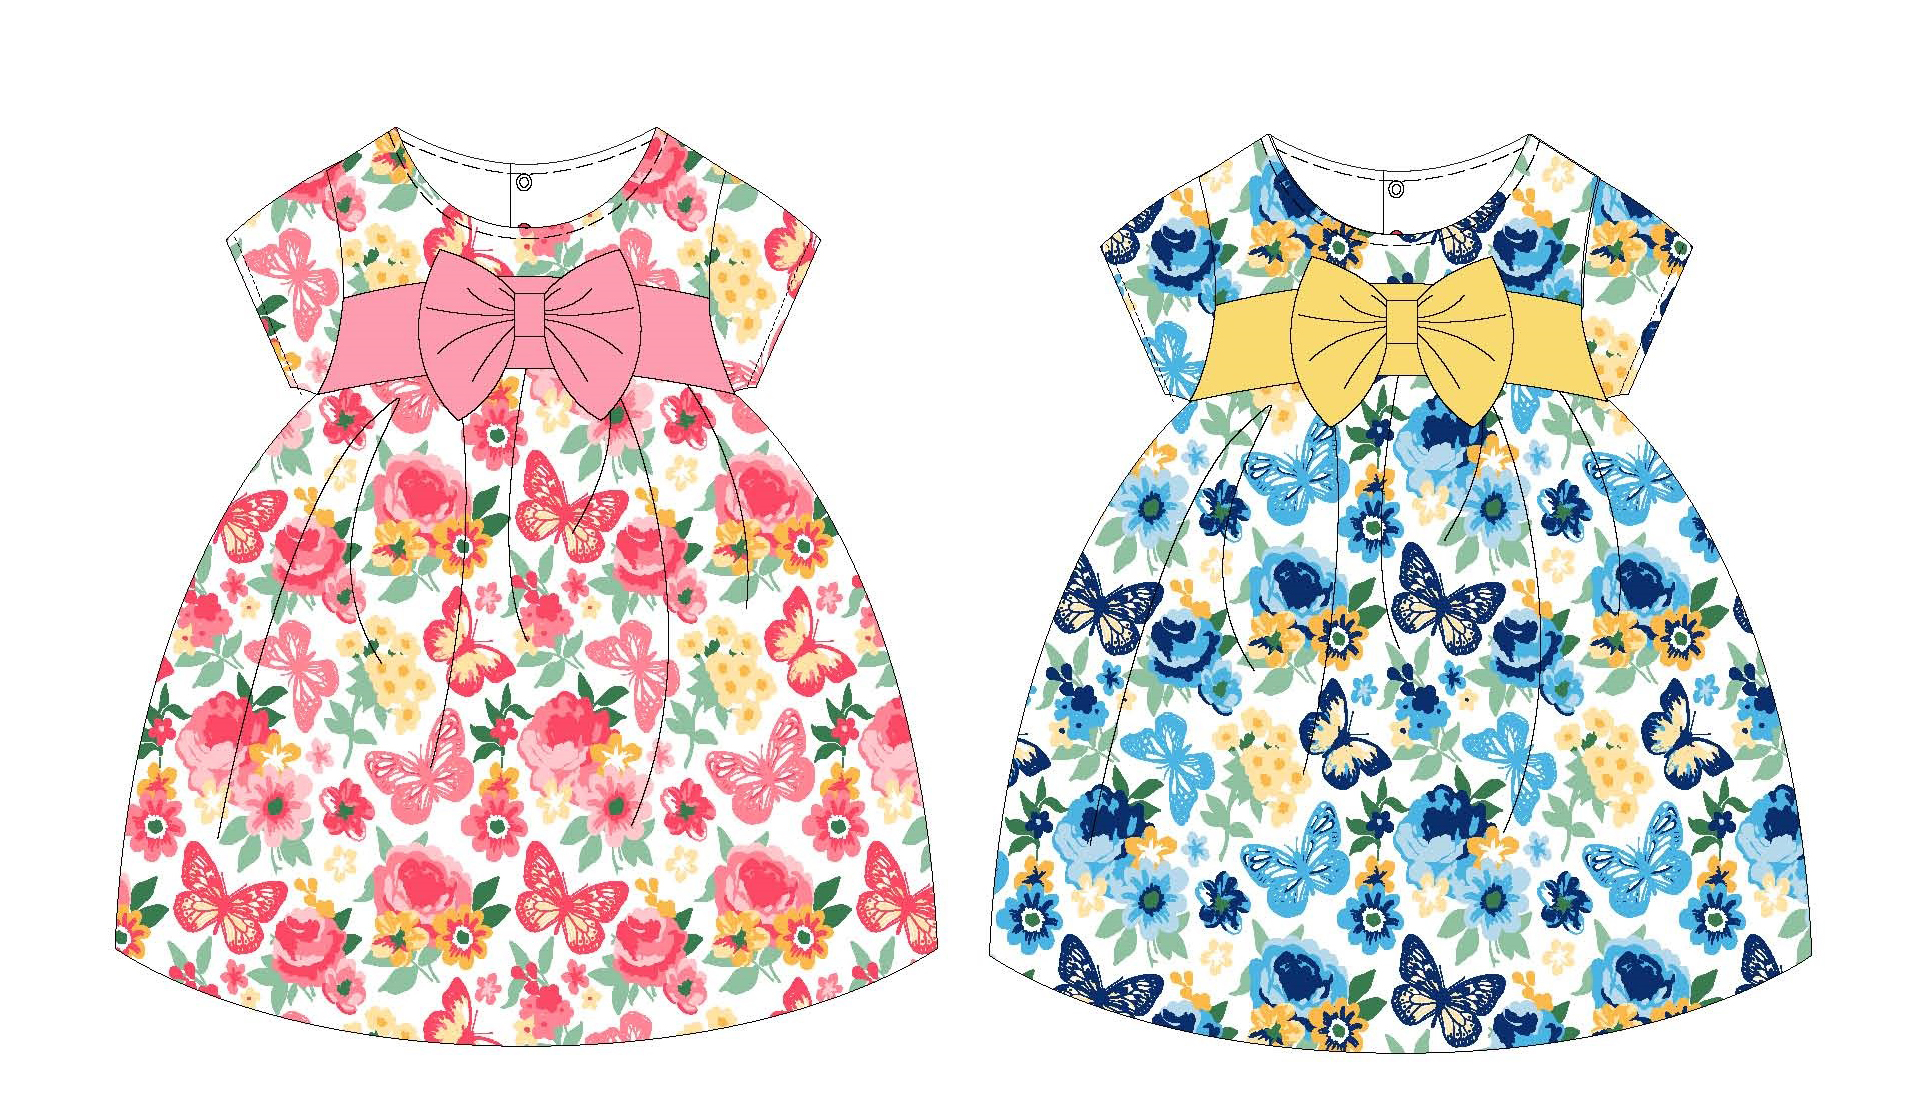 Toddler Girl's Knit Printed Dresses w/ Embroidered Ribbon Bow & Butterfly Print - Sizes 2T-4T